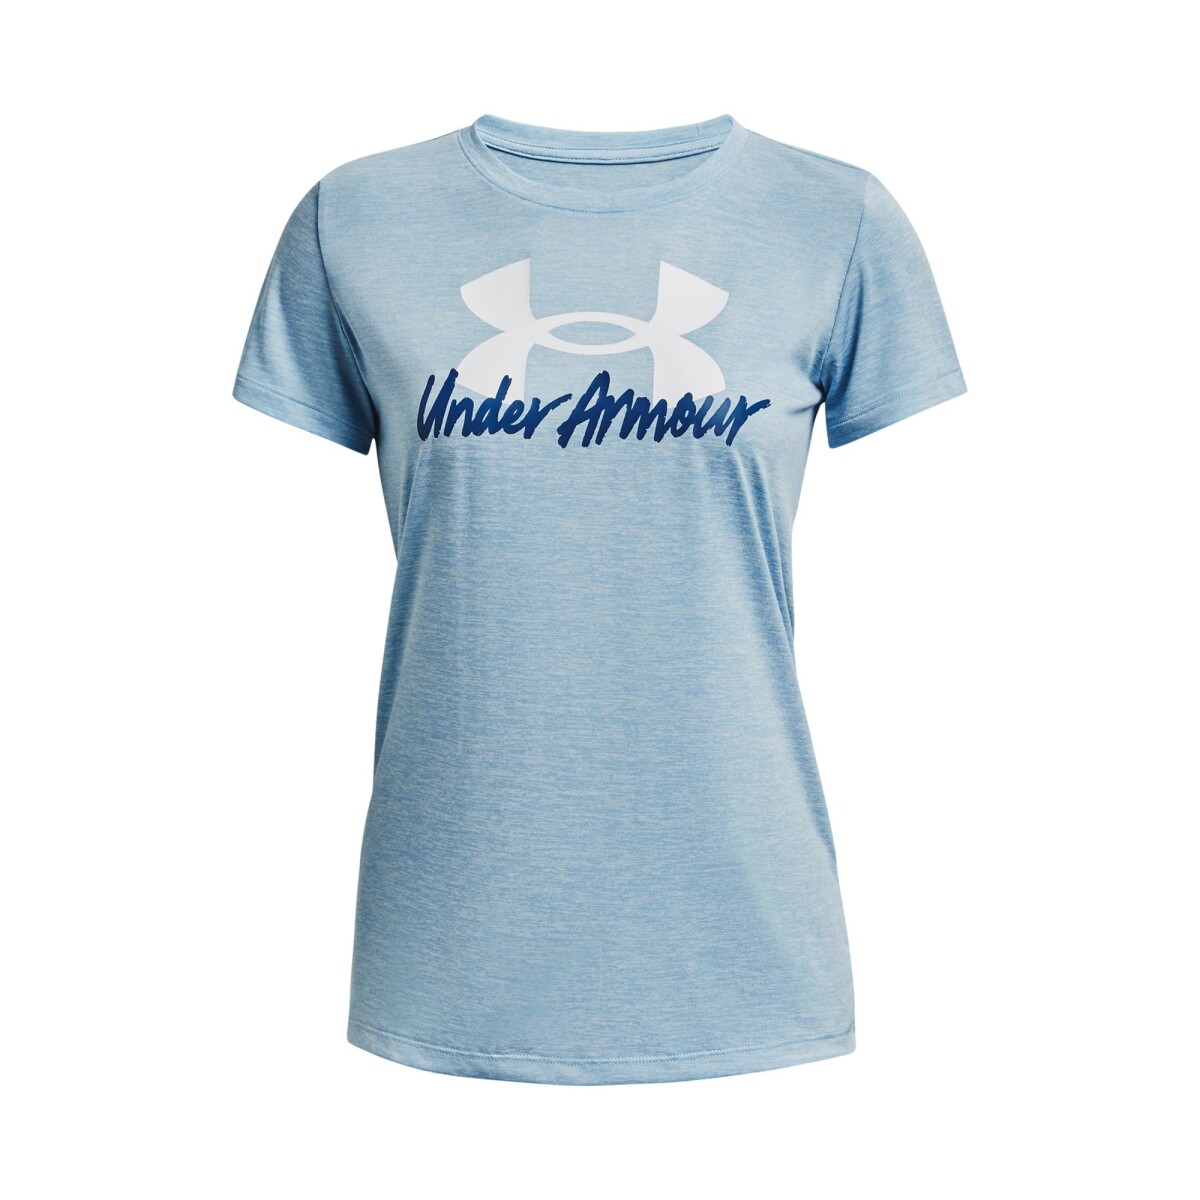 Remera Under Armour Tech Twst Graphic Ss - AZUL 